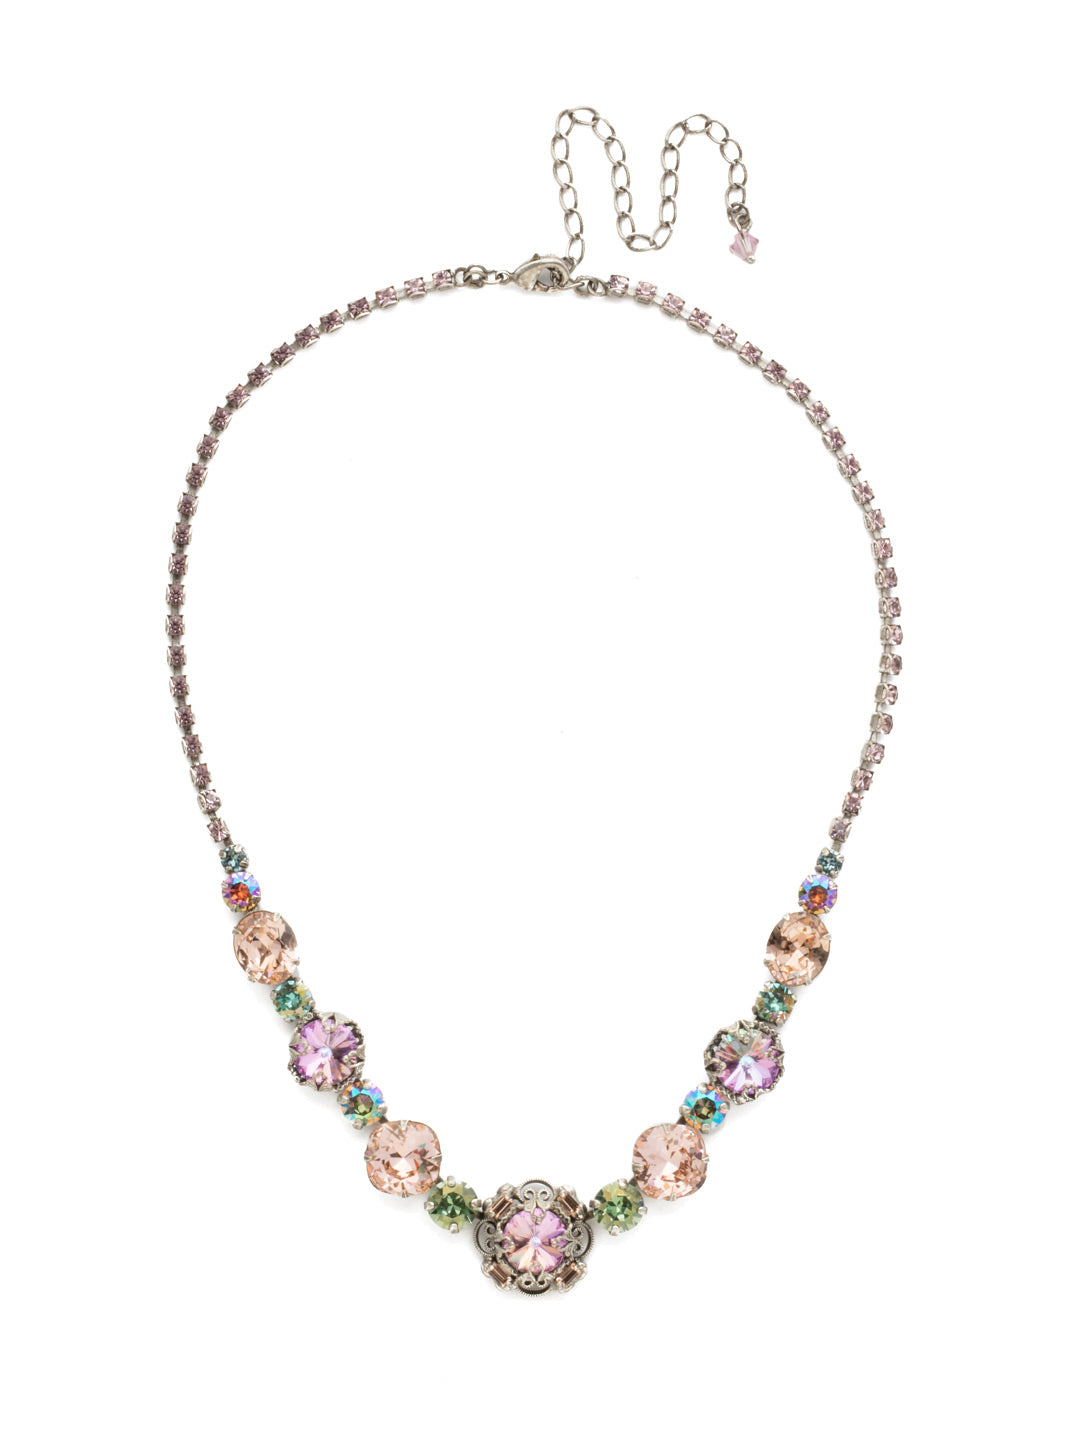 Echeveria Necklace - NDU17ASLPA - This style spotlights a link of cushion, round, and oval crystals in various sizes completed by a ball and chain clasp.